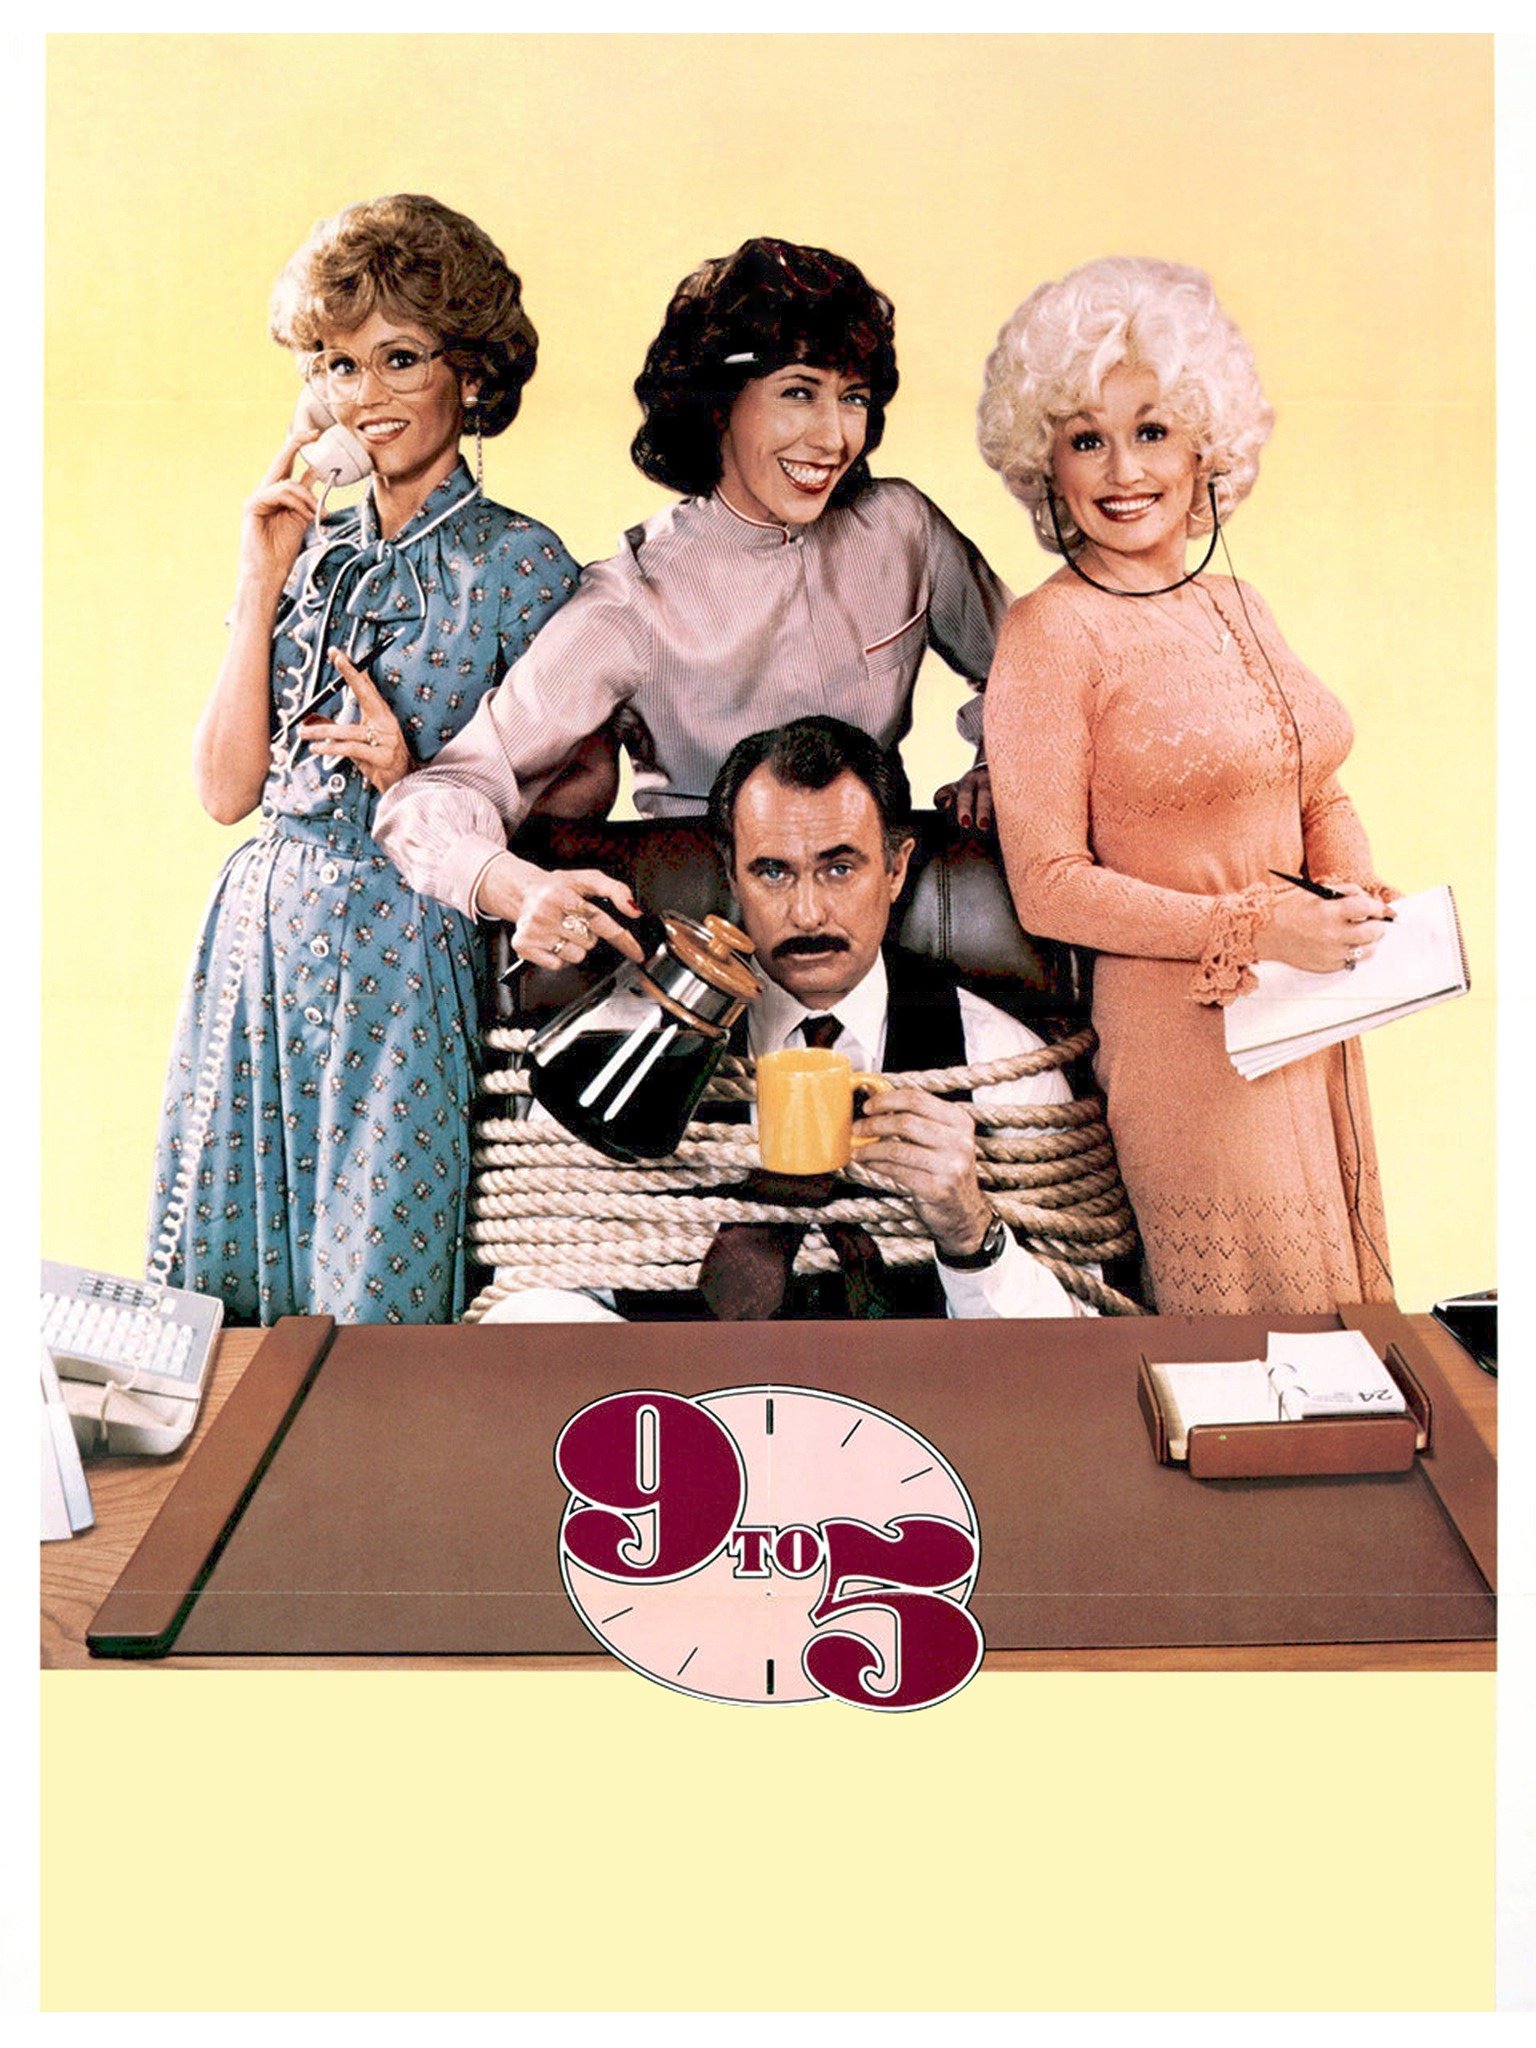 9 to 5 (1980) Rotten Tomatoes